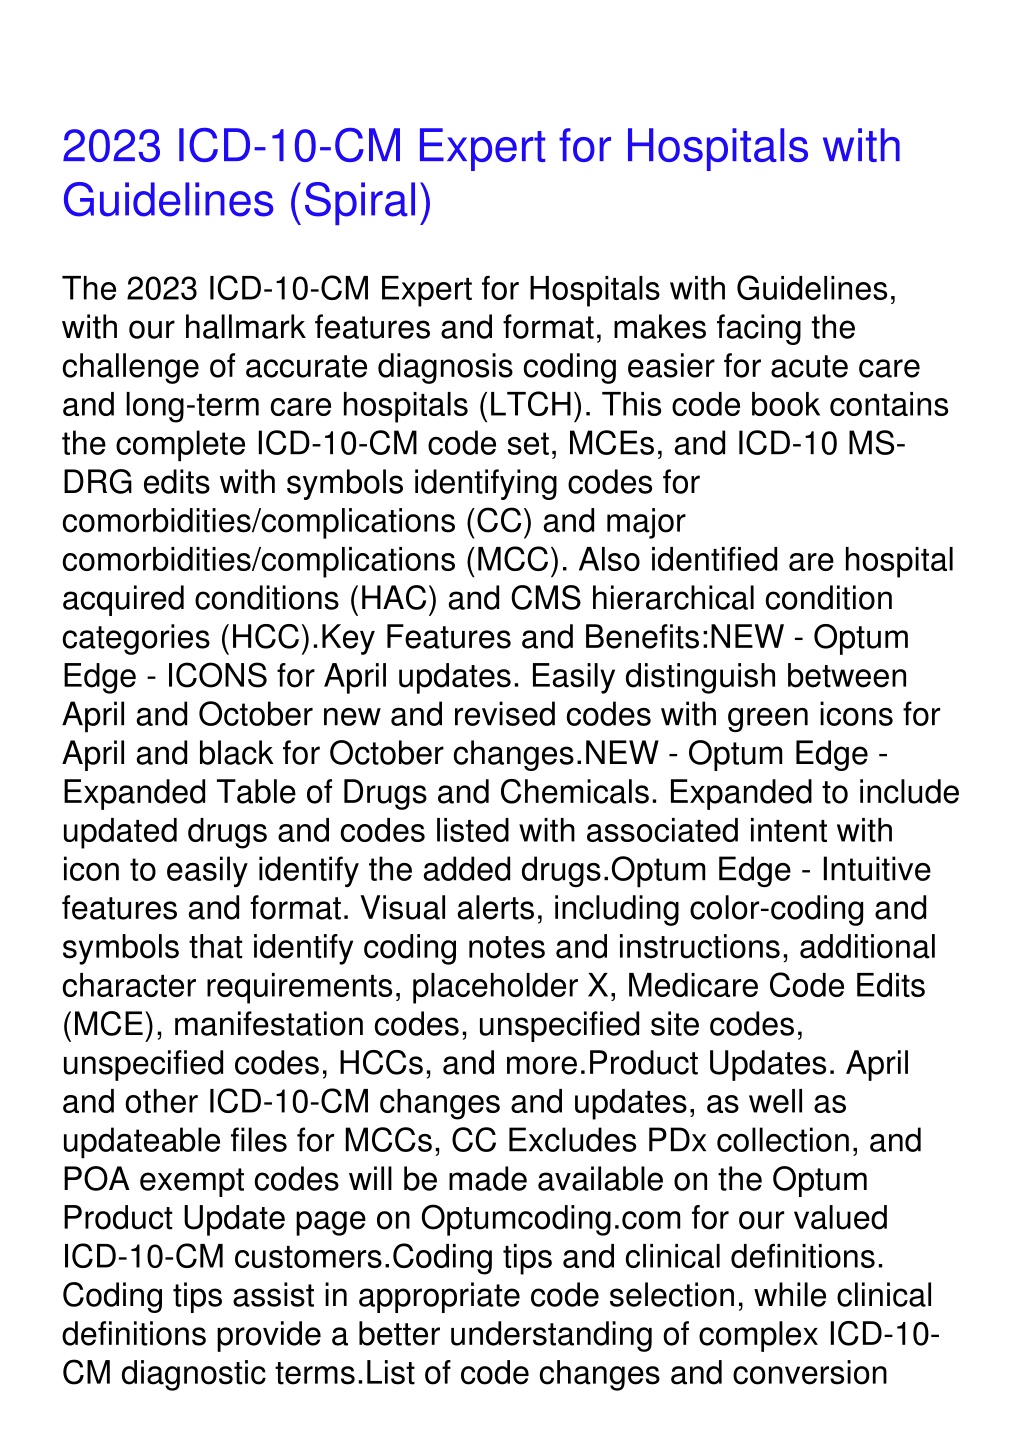 PPT DOWNLOAD/PDF 2023 ICD10CM Expert for Hospitals with Guidelines